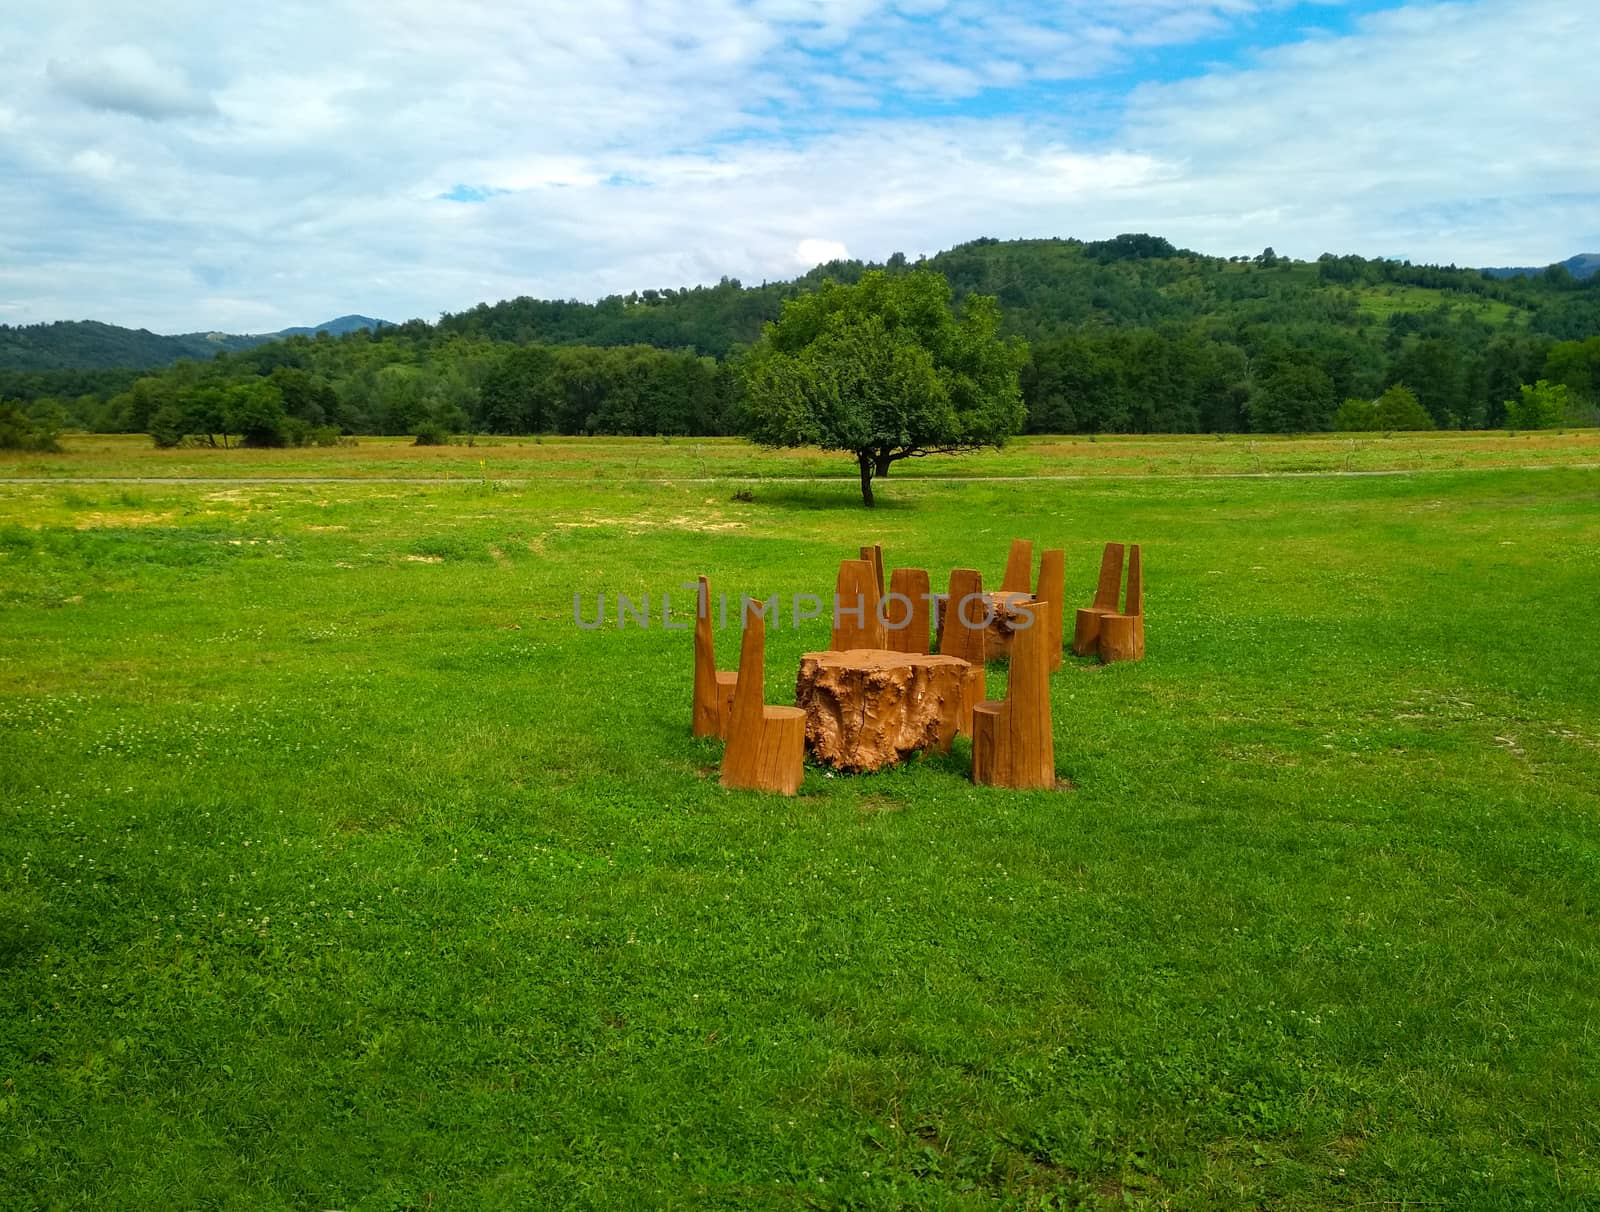 Table with solid wood chairs on a green lawn on a background of mountains, outdoor recreation. Outdoor restaurant area against the backdrop of a mountain landscape